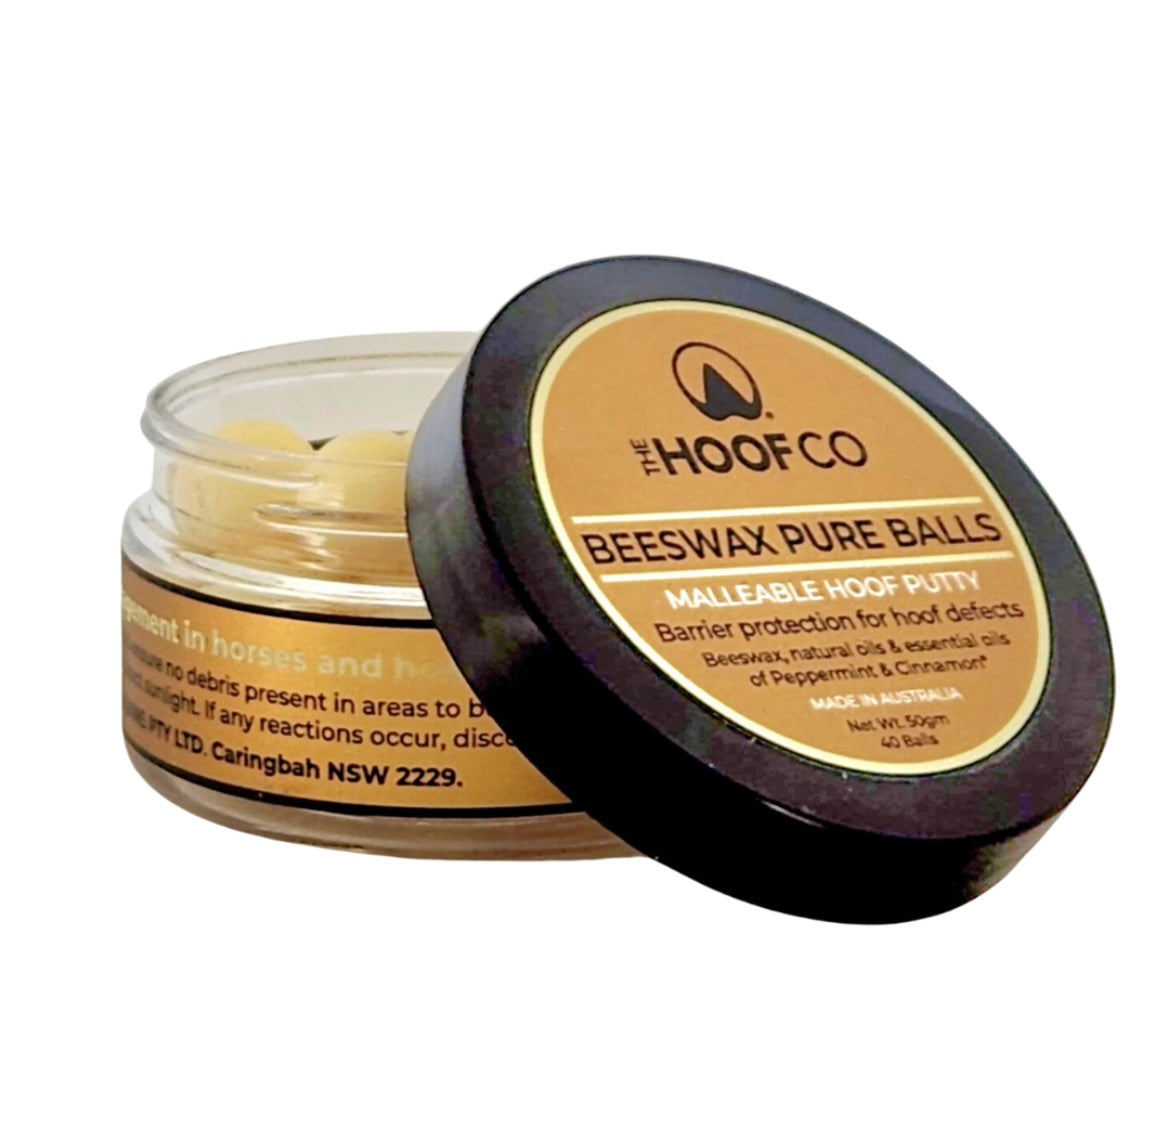 The Hoof Co - Beeswax Pure Balls